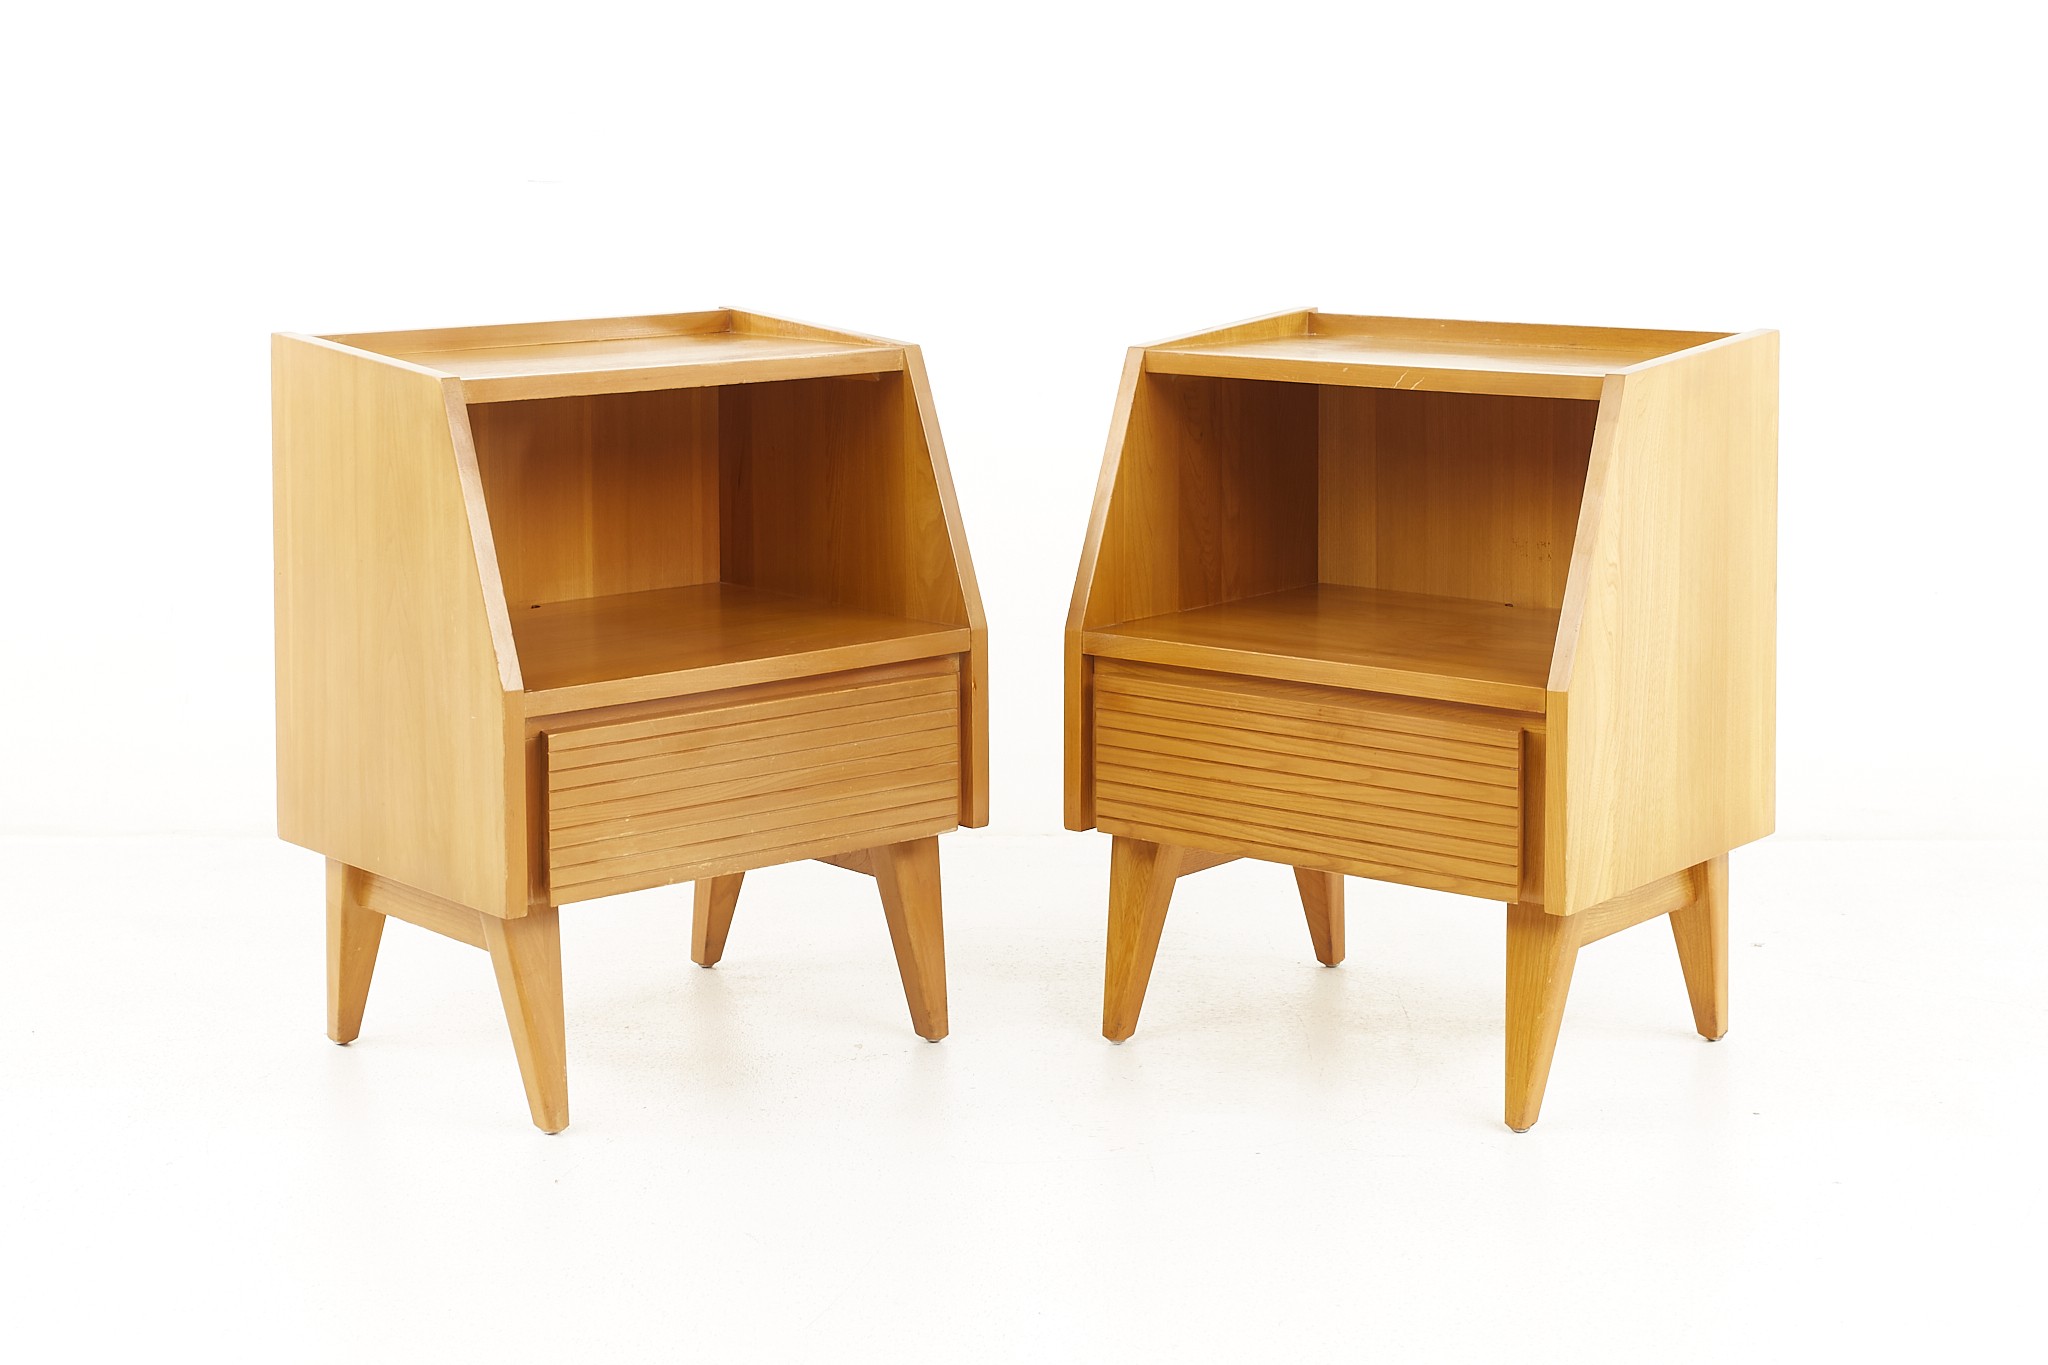 Conant Ball Mid Century Maple Nightstands - a Pair